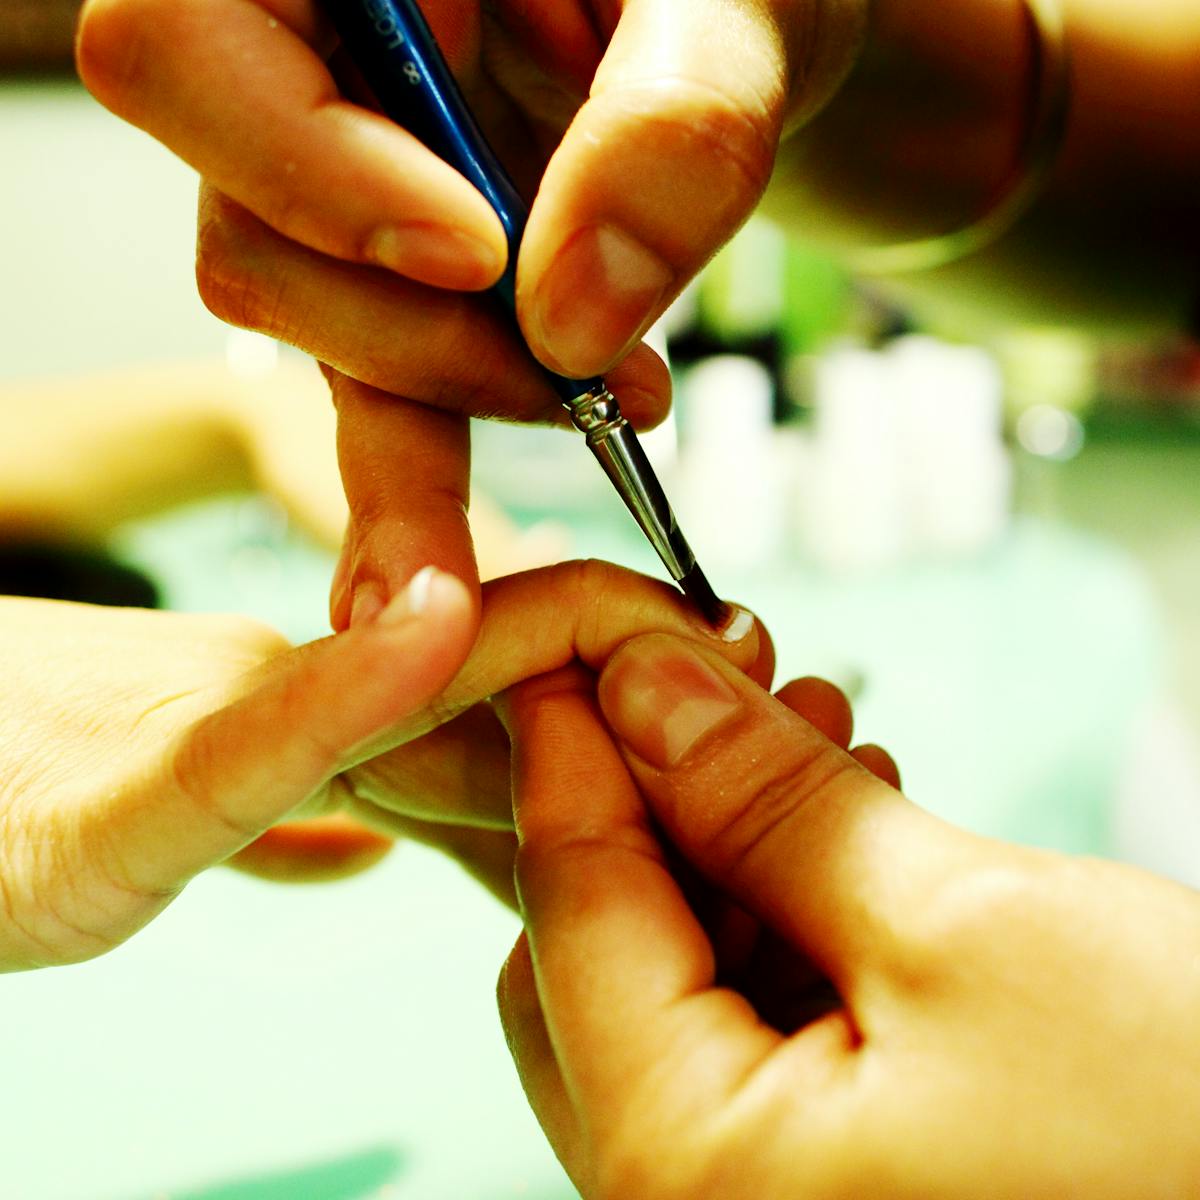 Nail Salon Workers Suffer Chemical Exposures That Can Be Like Working At A Garage Or A Refinery